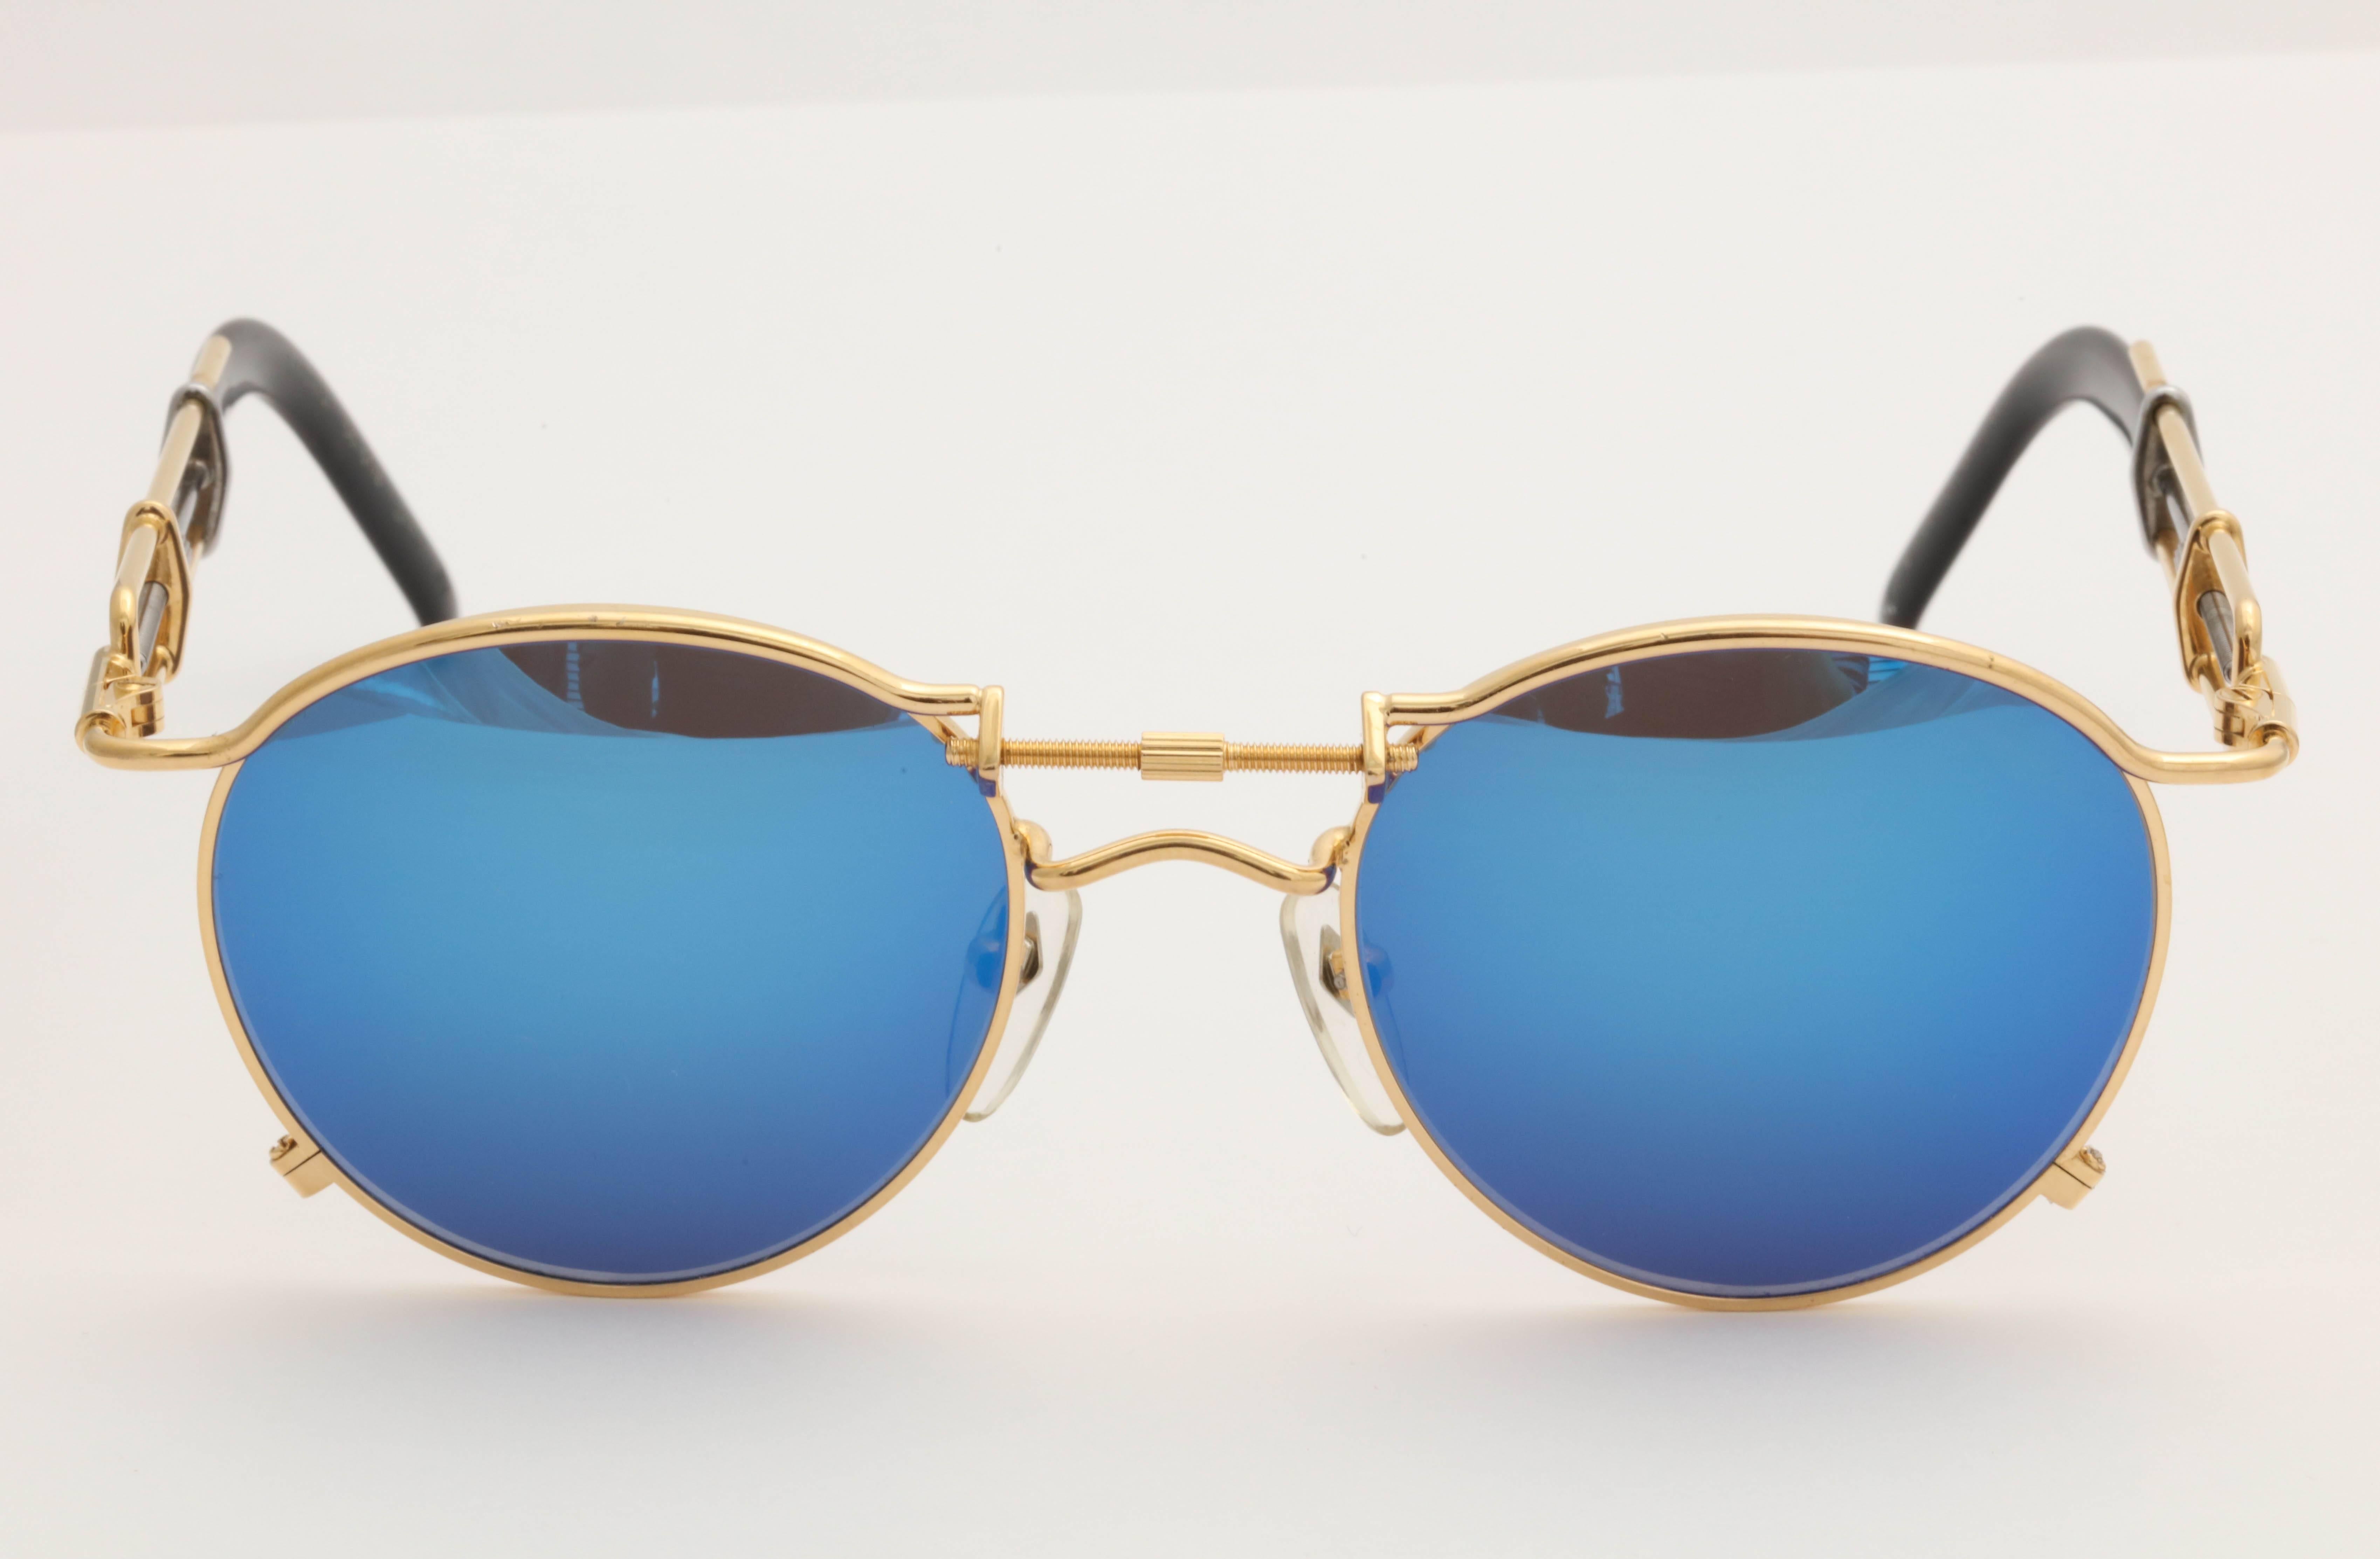 Vintage Jean Paul Gaultier 56-0174 Sunglasses In Excellent Condition For Sale In Chicago, IL